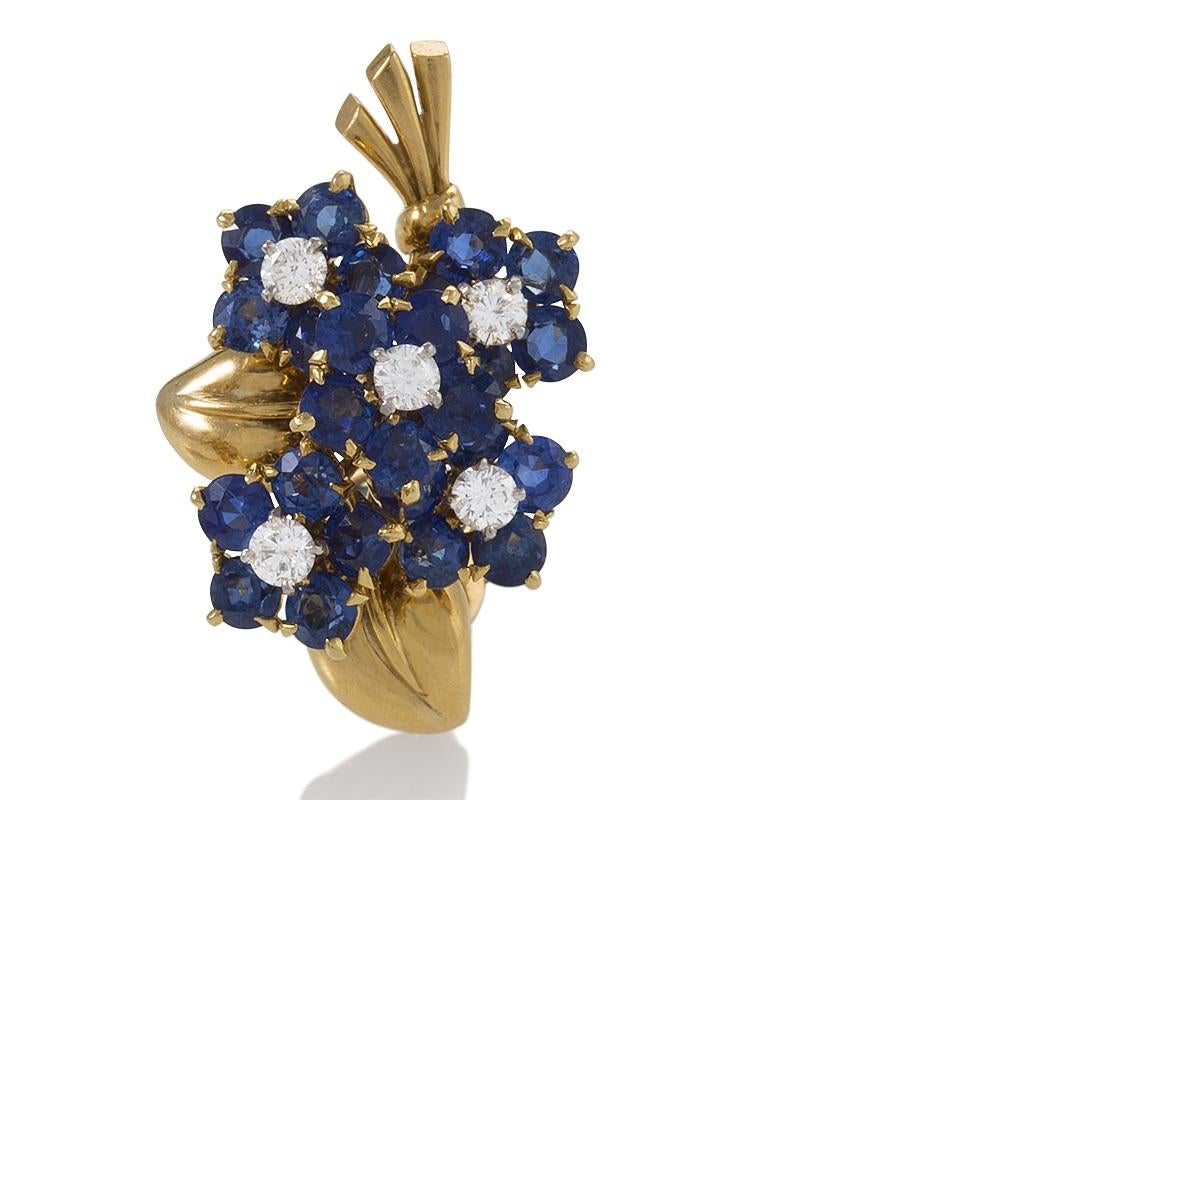  pair of French Retro 18 karat gold bouquet earrings with diamonds and sapphires by Van Cleef & Arpels. Each designed as a cluster of sapphire blossoms centering diamond pistils amidst leaves and foliage, set with 10 round brilliant-cut diamonds